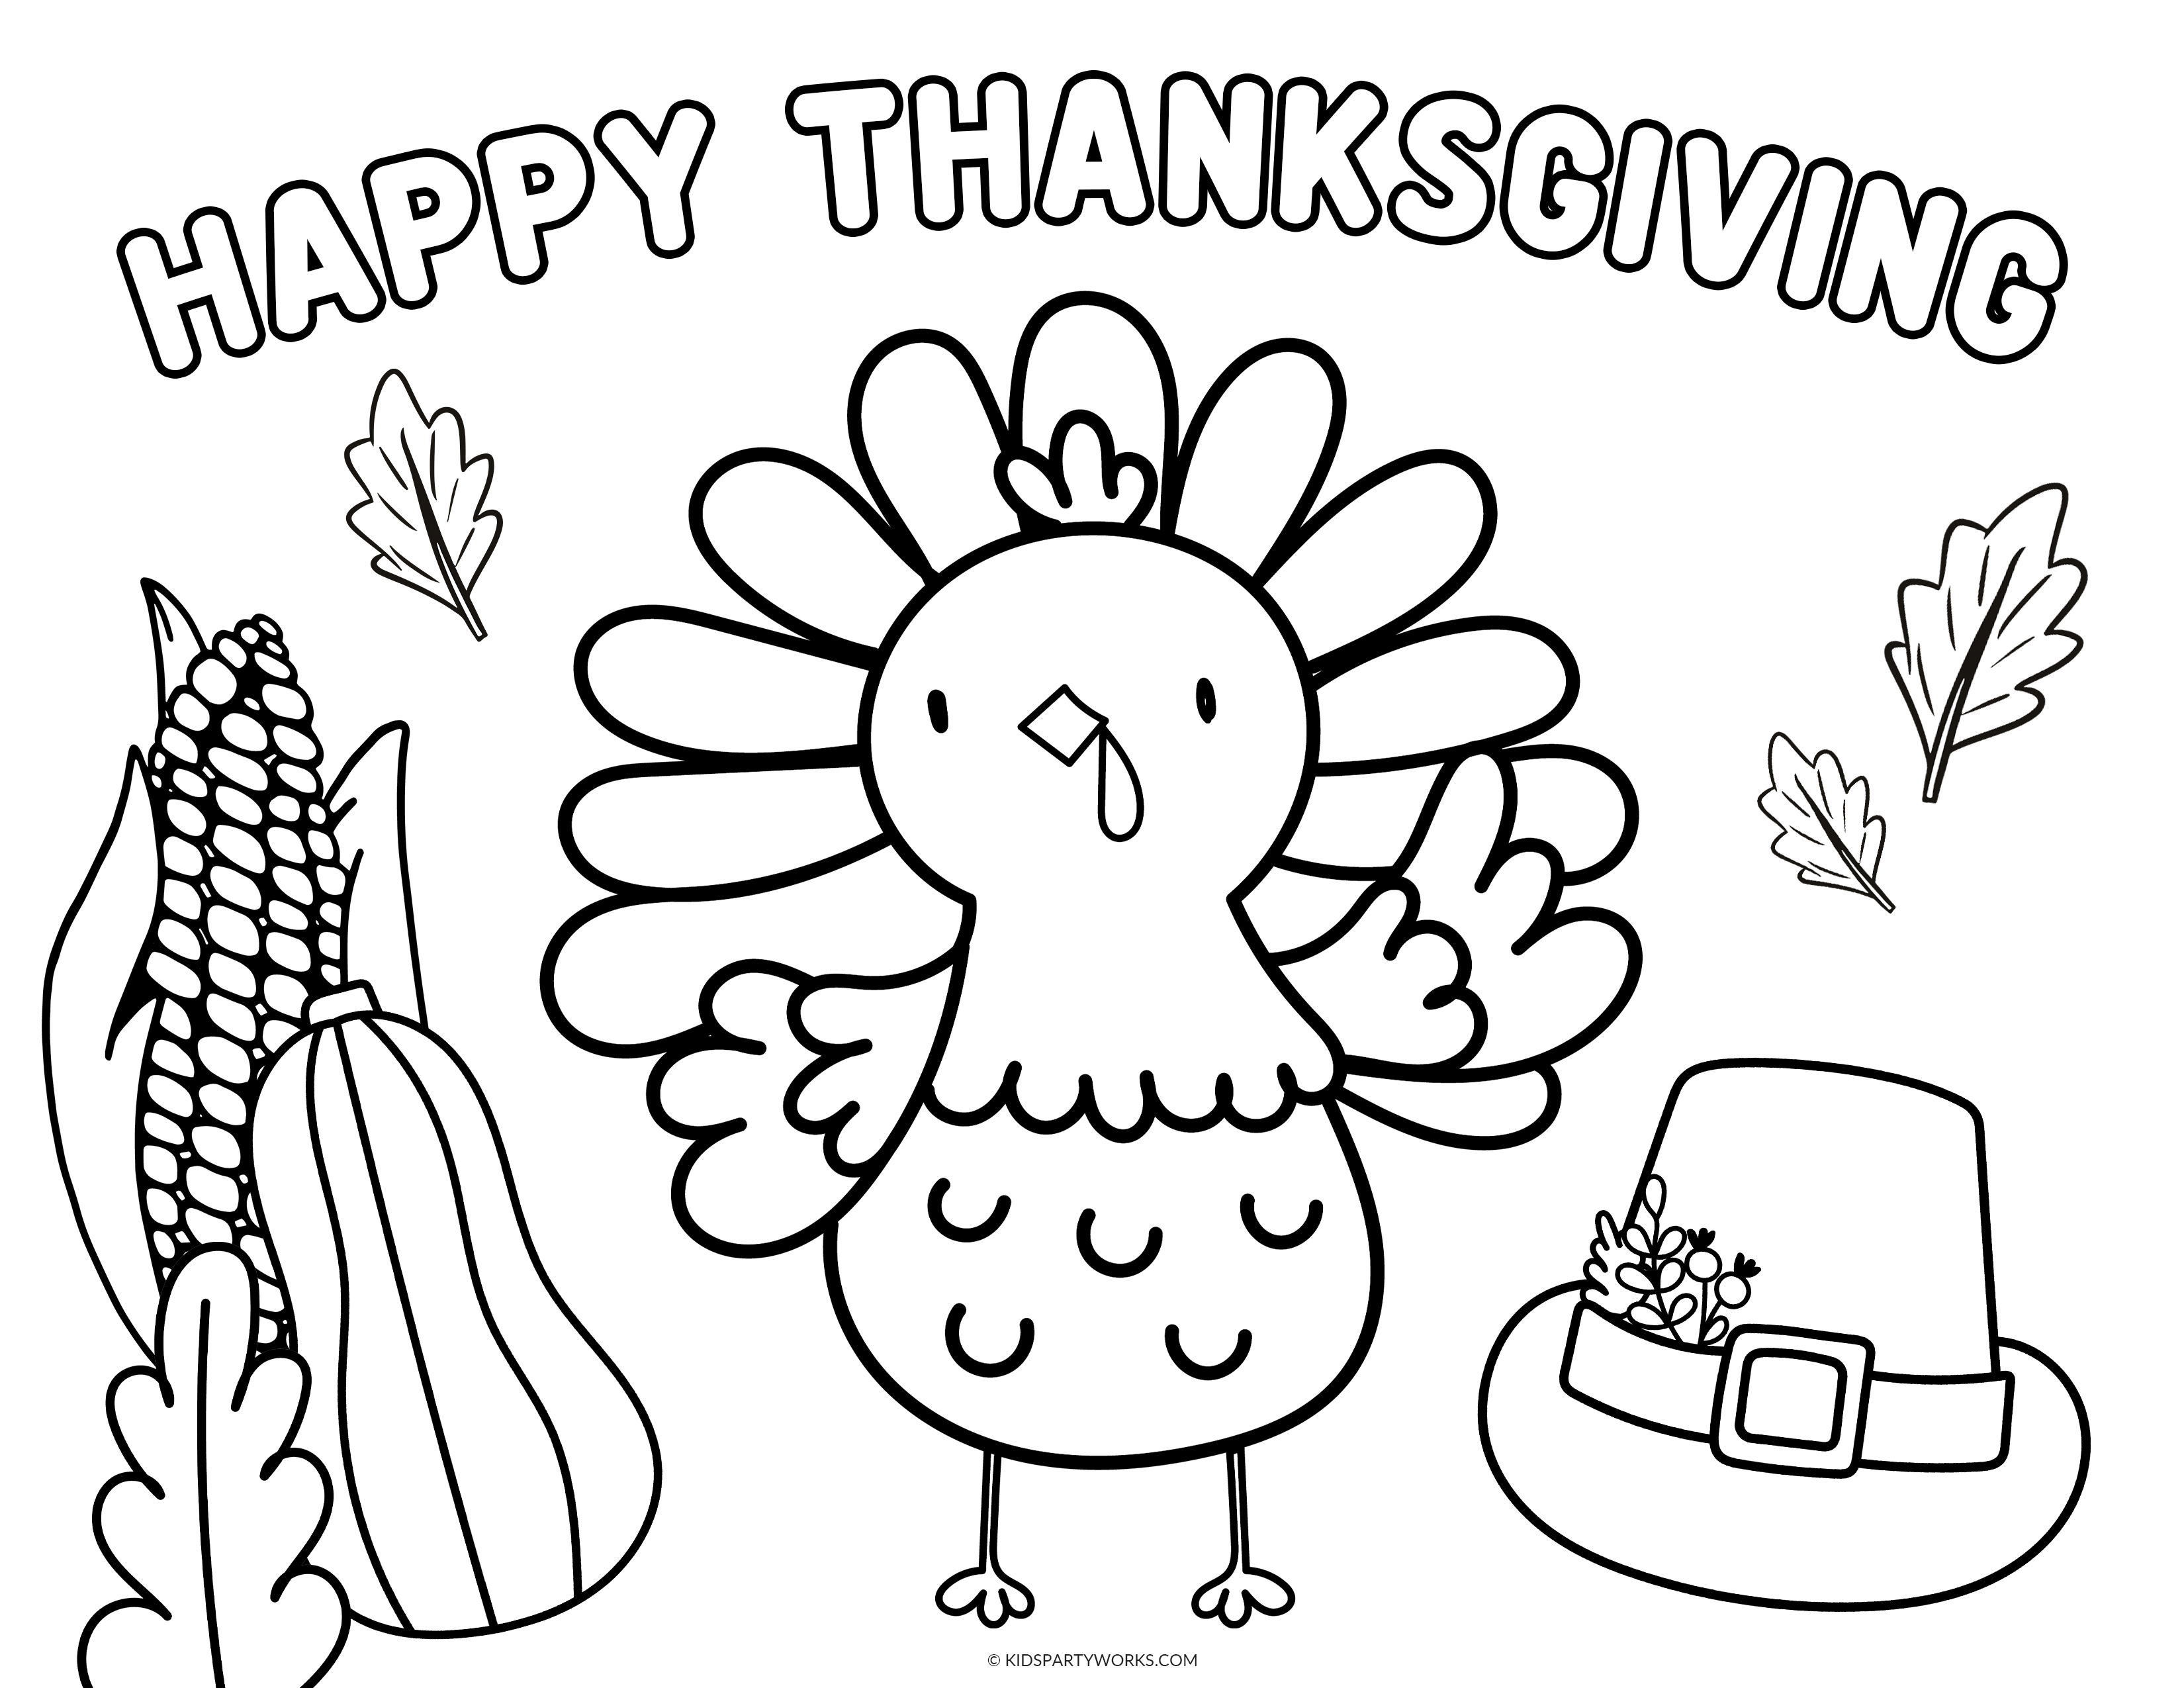 Free Thanksgiving Coloring Pages For Kids | vlr.eng.br